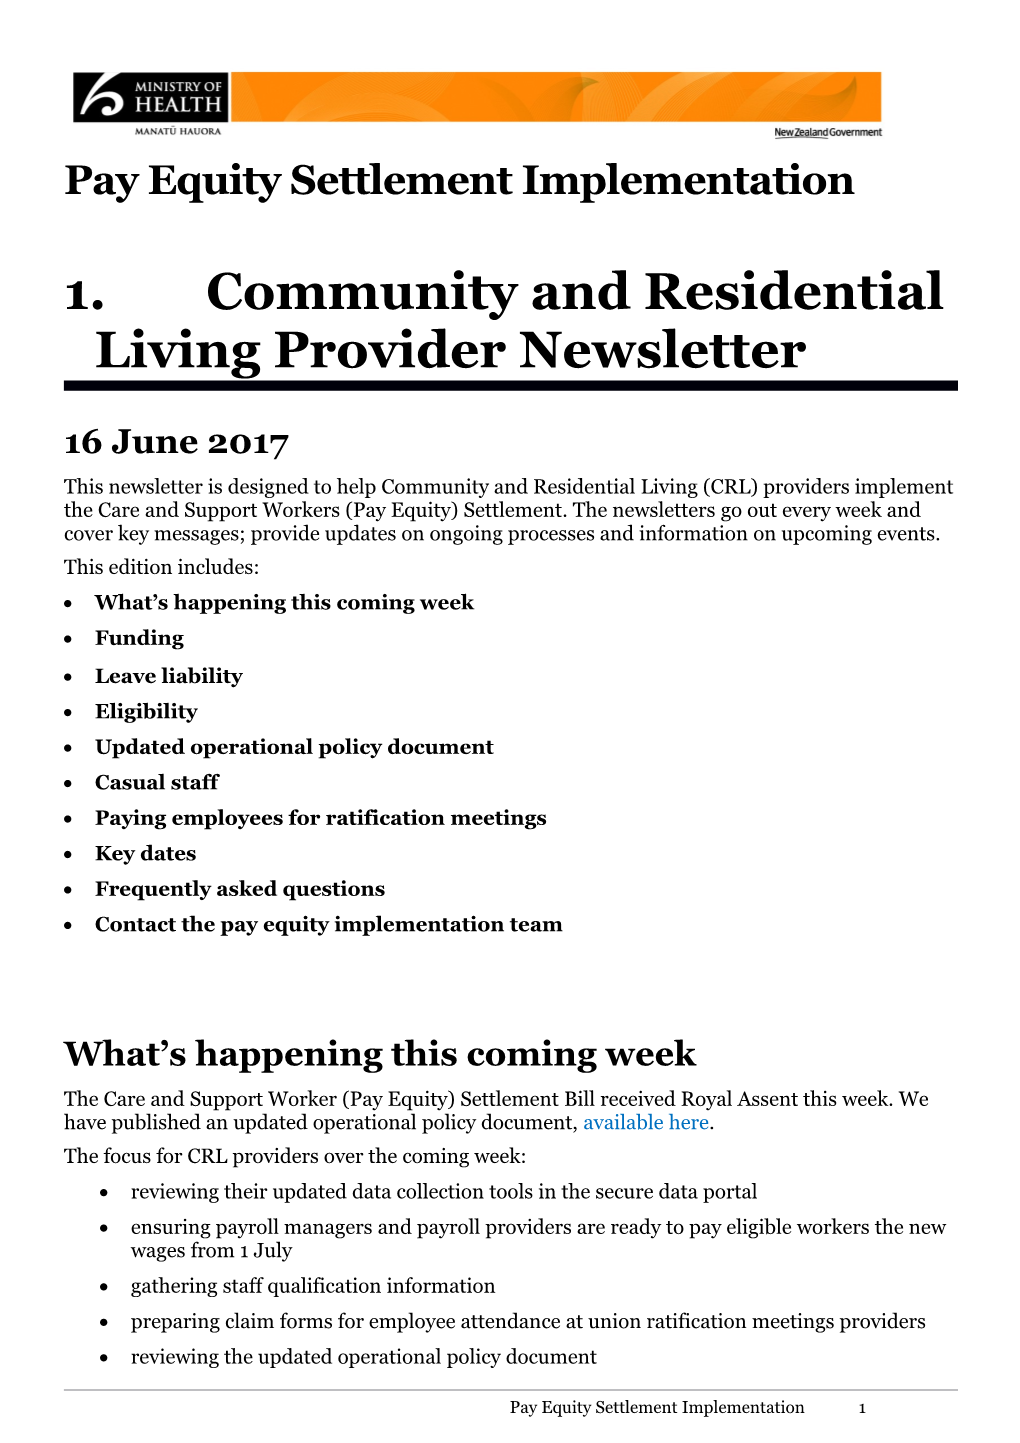 Community and Residential Living Provider Newsletter: 26 May 2017